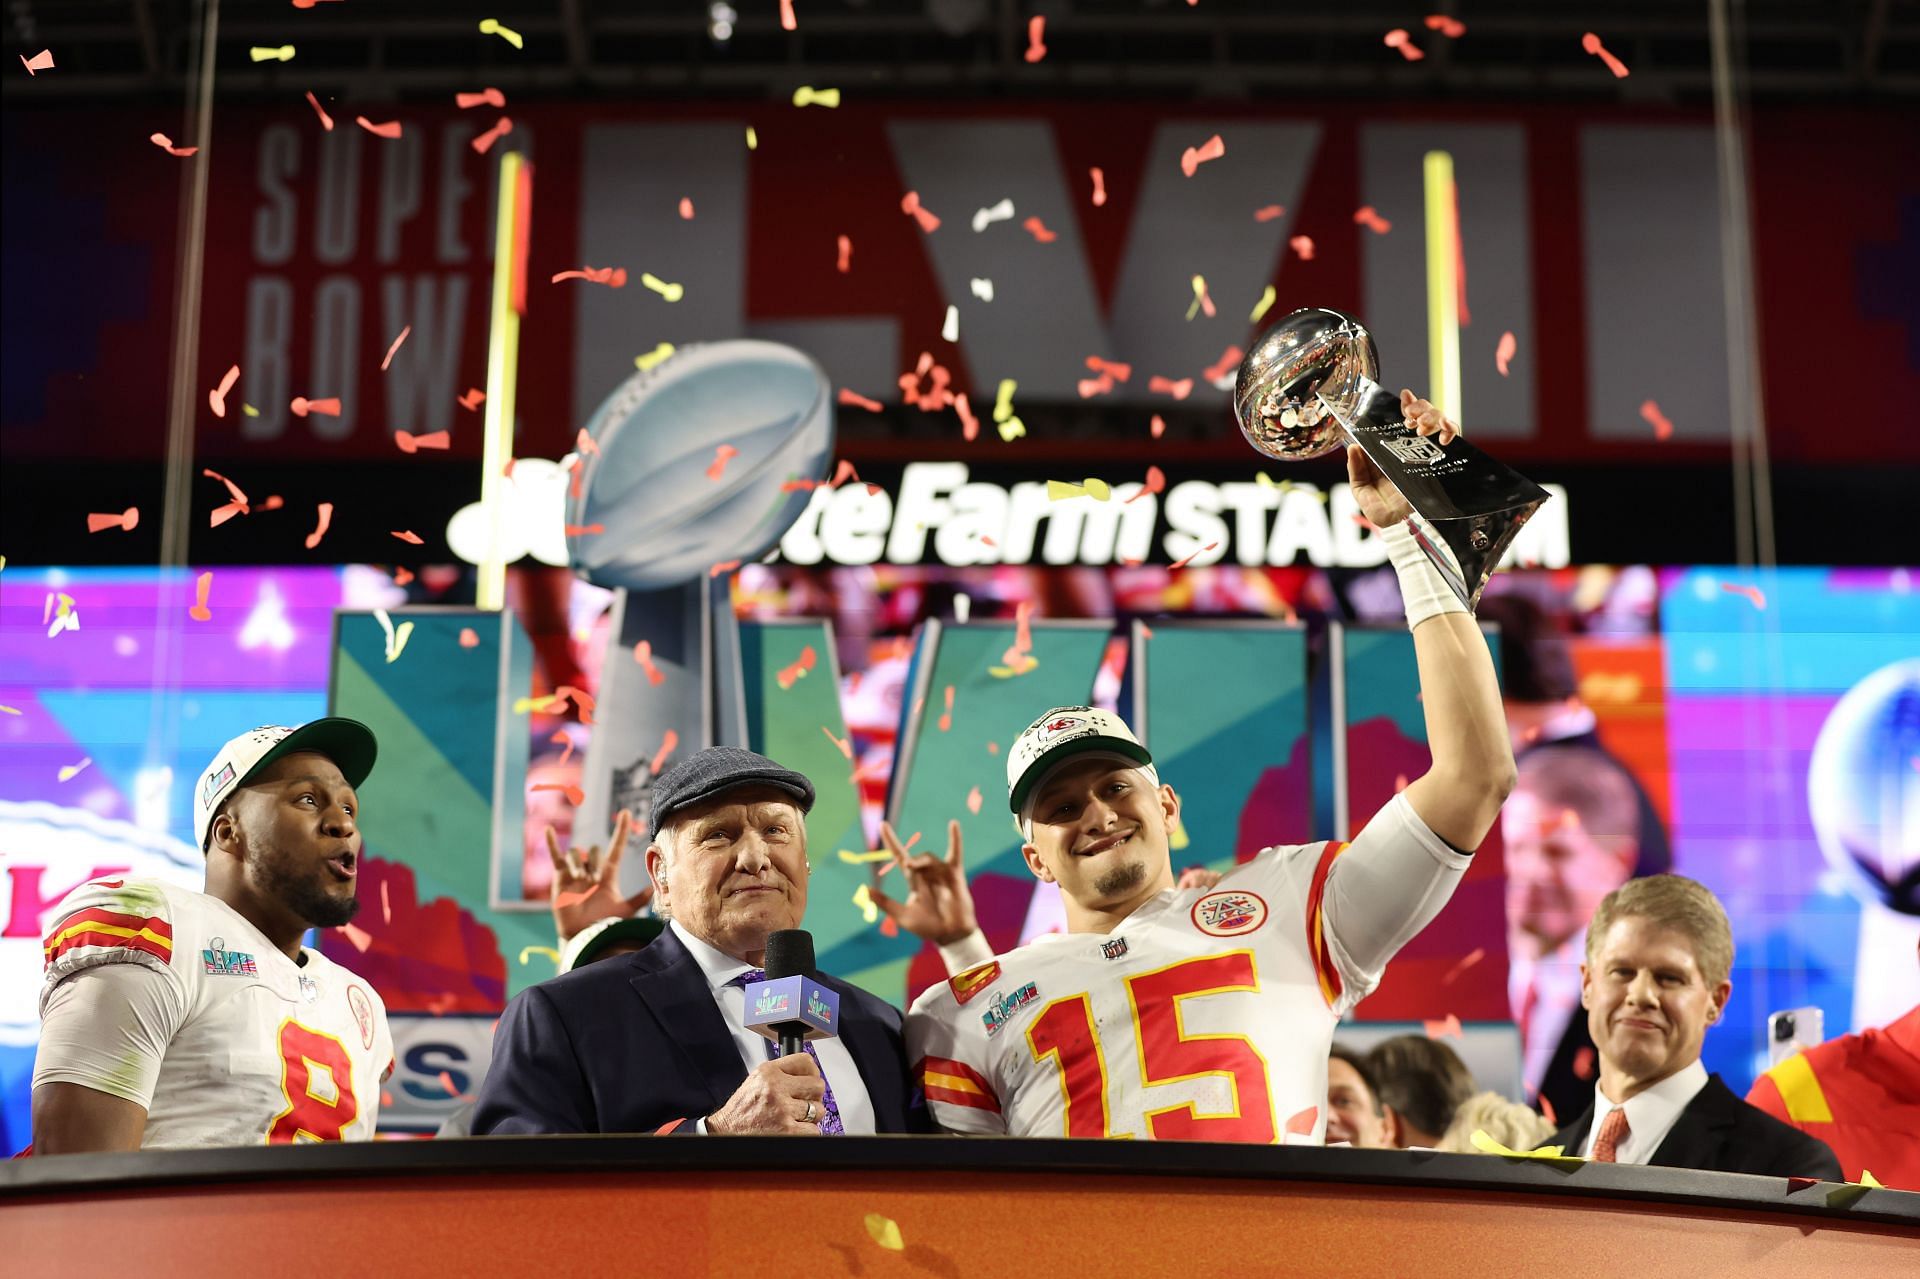 The Chiefs captured the Super Bowl win